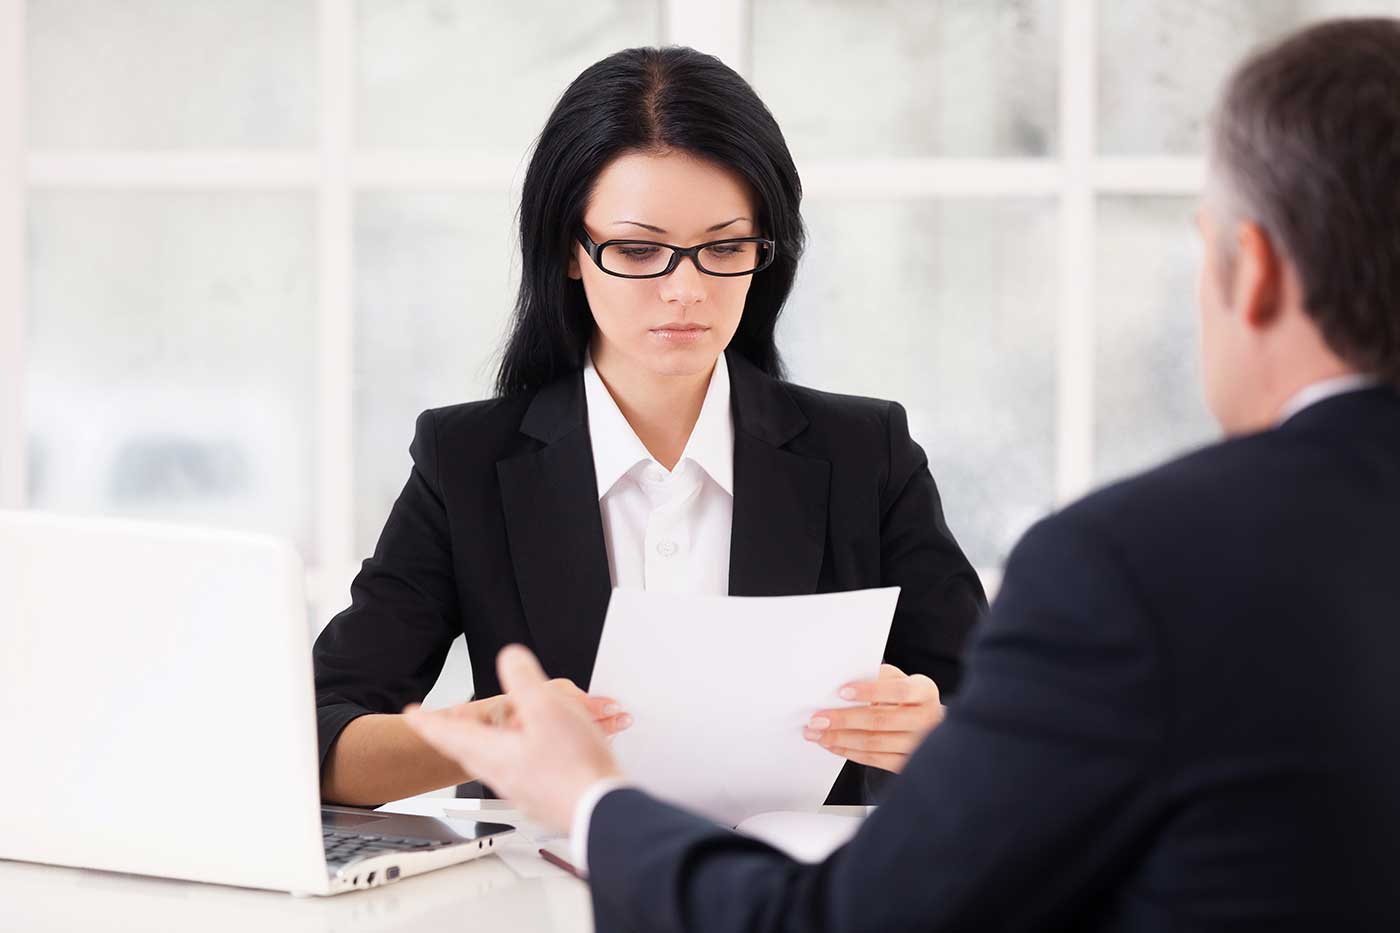 Tips on how to prepare for a disciplinary hearing at work